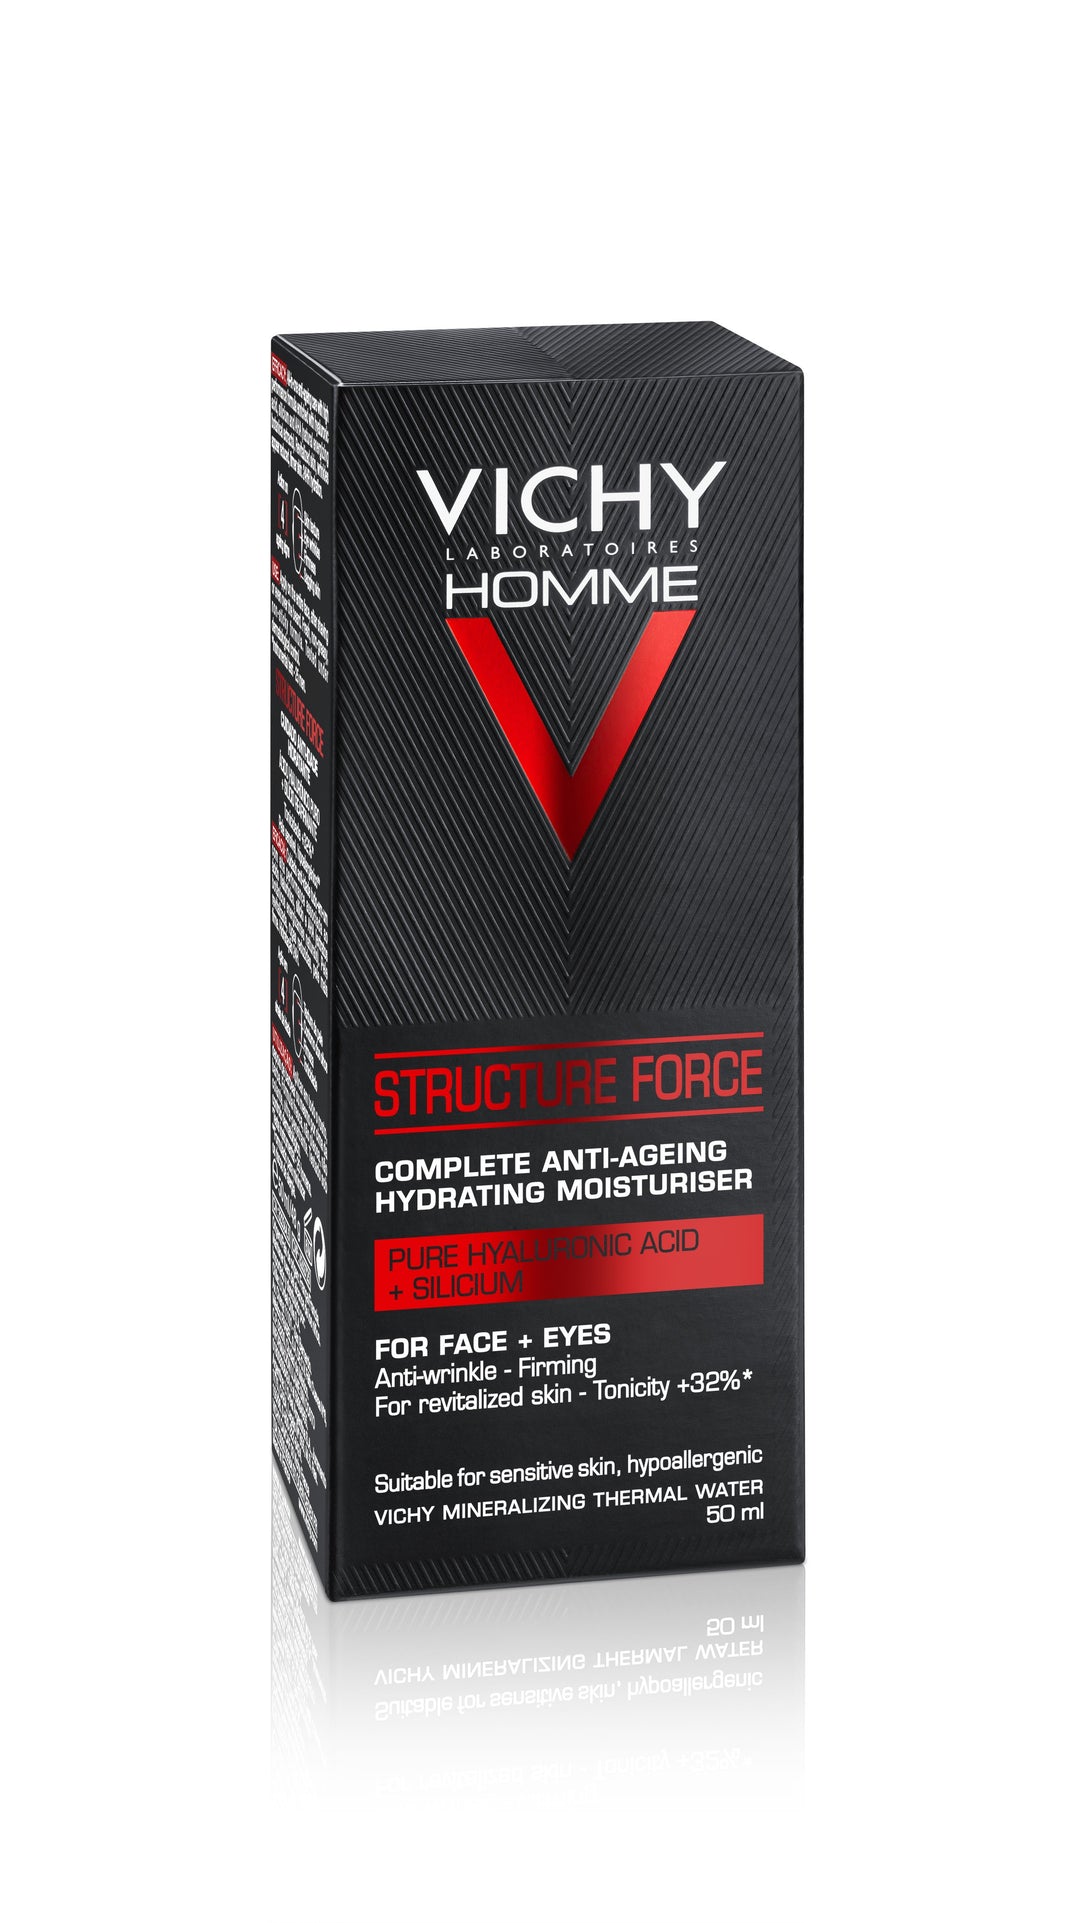 Vichy VICHY HOMME Structure Force 50ml - SkinEffects Zwolle